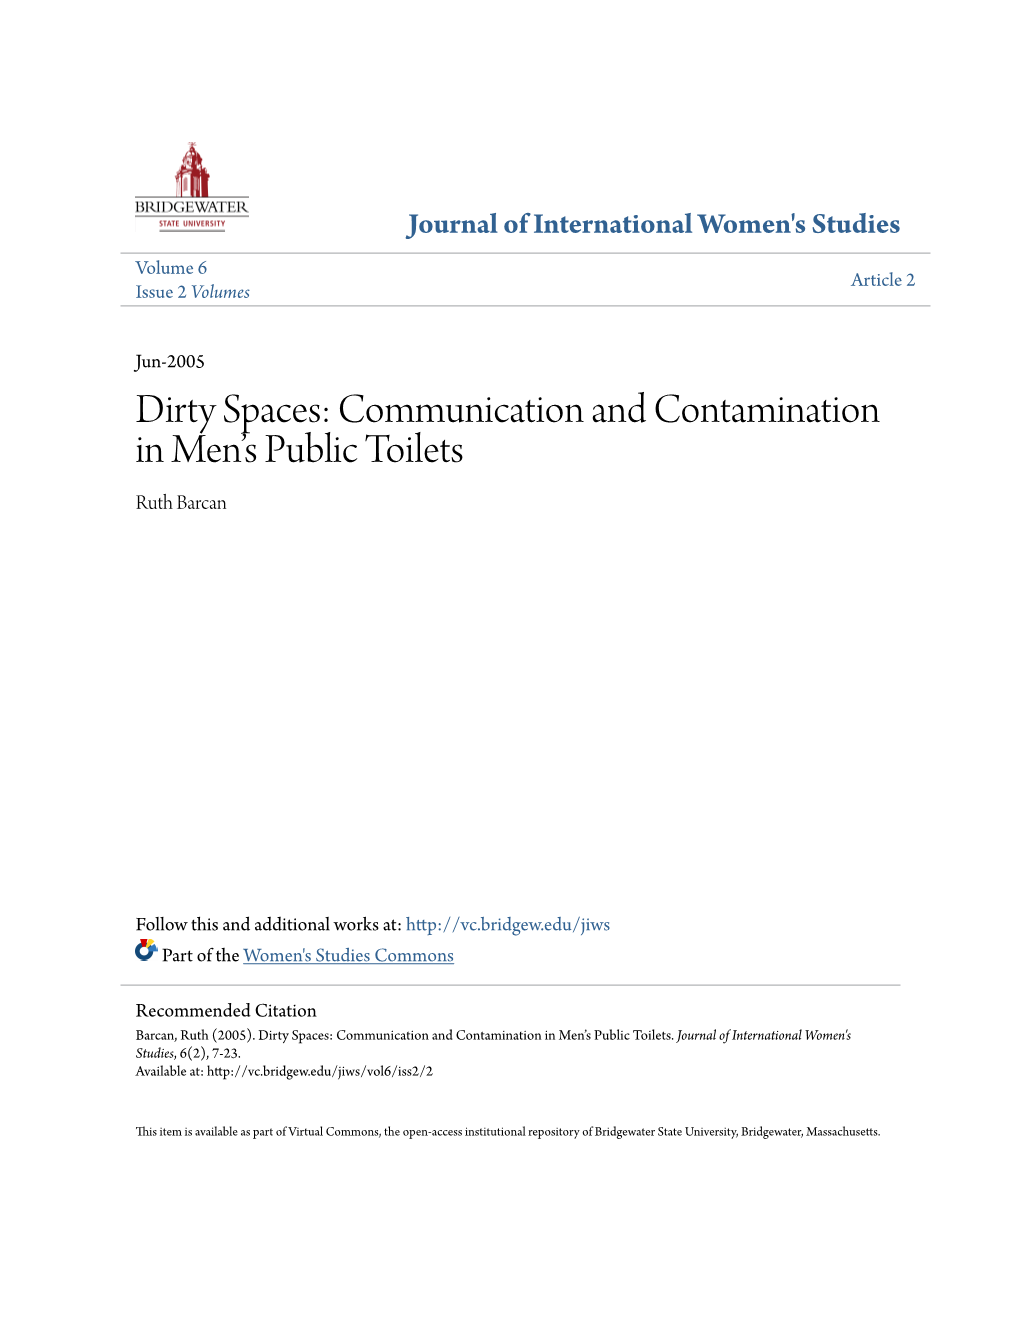 Communication and Contamination in Men's Public Toilets